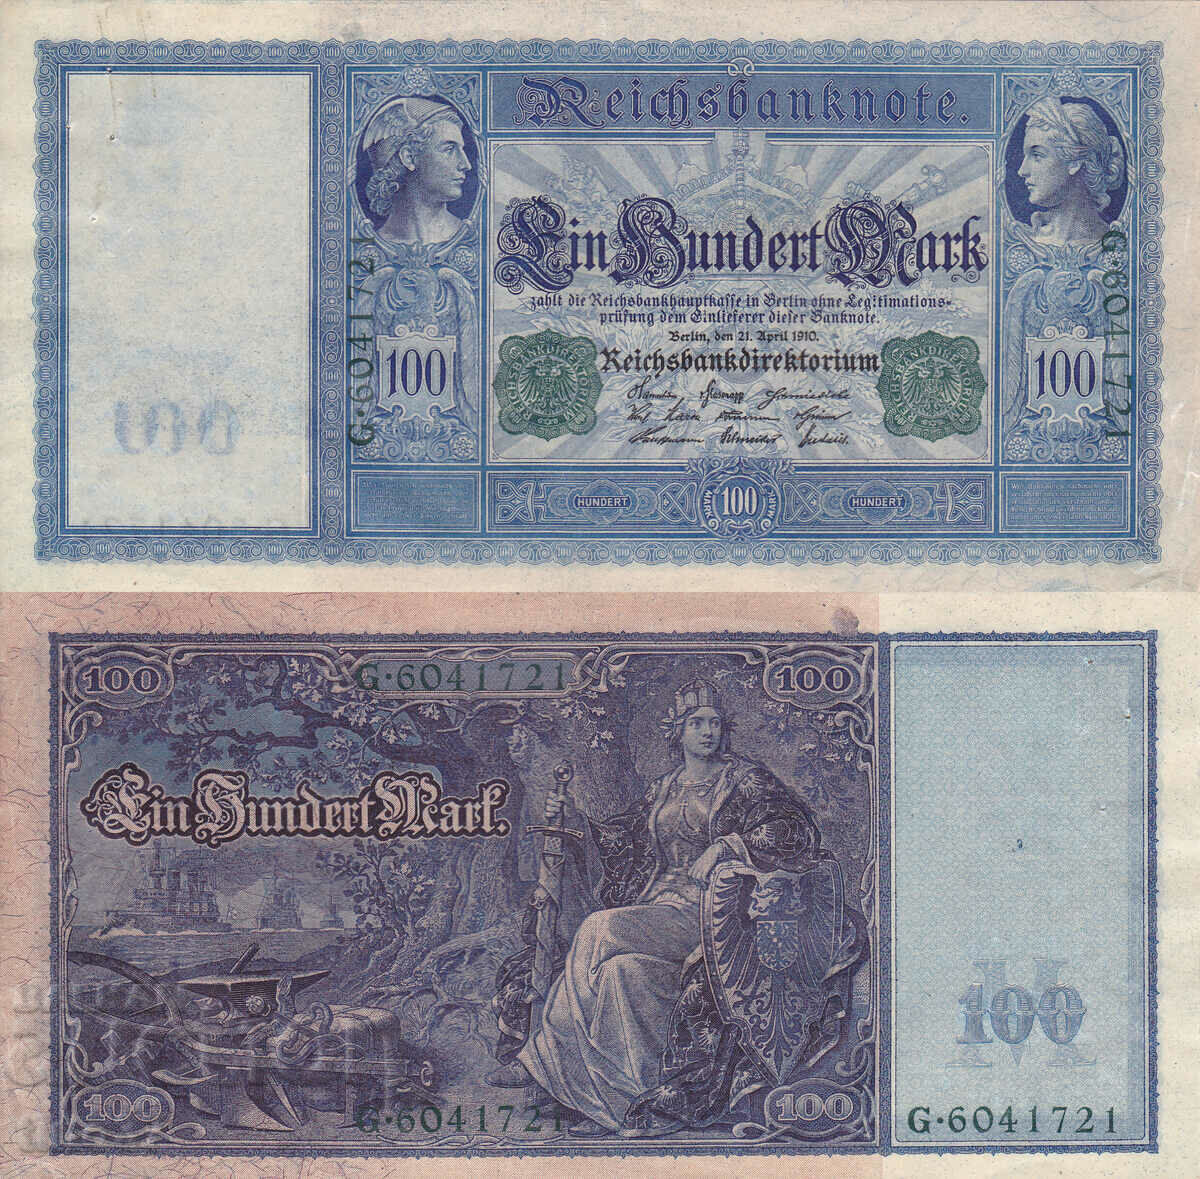 tino37- GERMANY - 100 STAMPS /green stamp/ - 1910 - XF